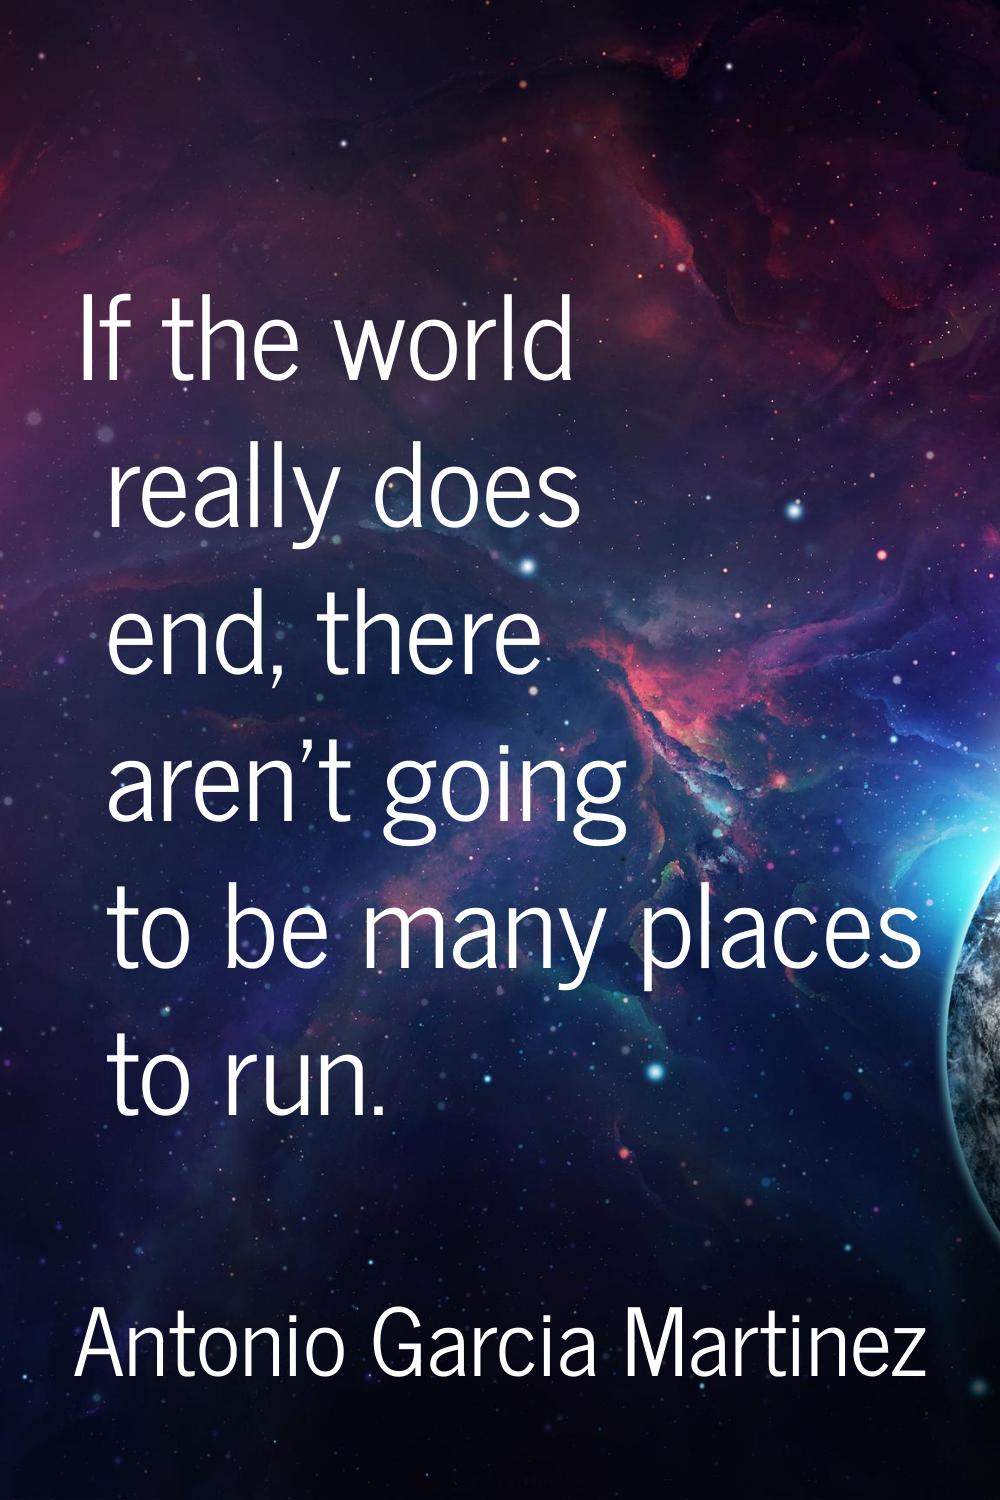 If the world really does end, there aren't going to be many places to run.